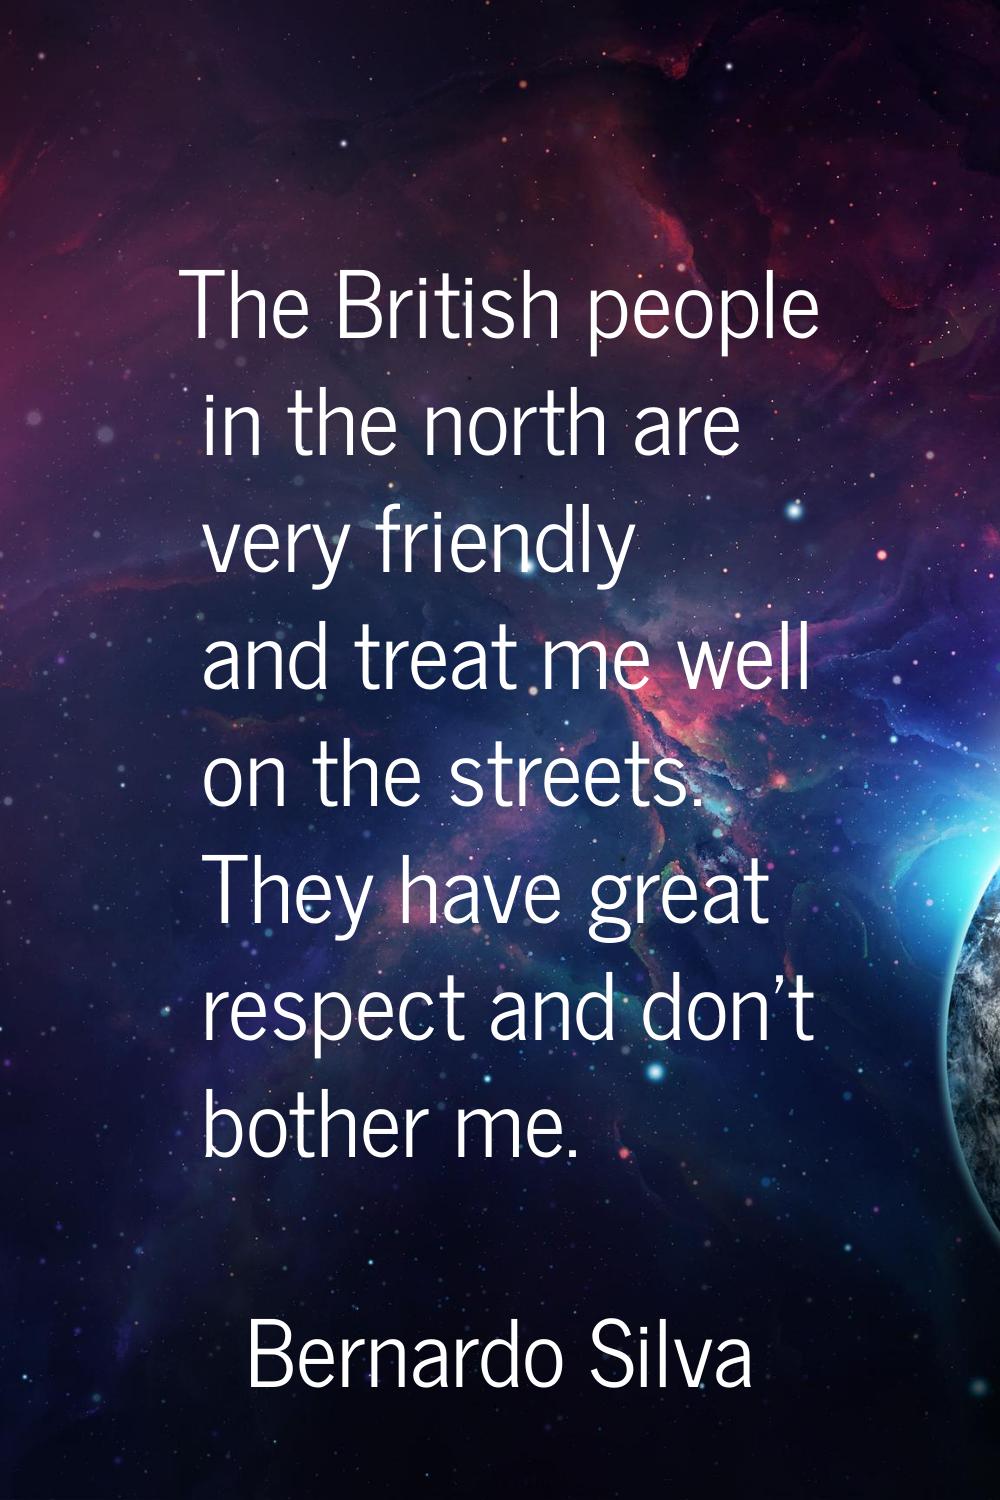 The British people in the north are very friendly and treat me well on the streets. They have great